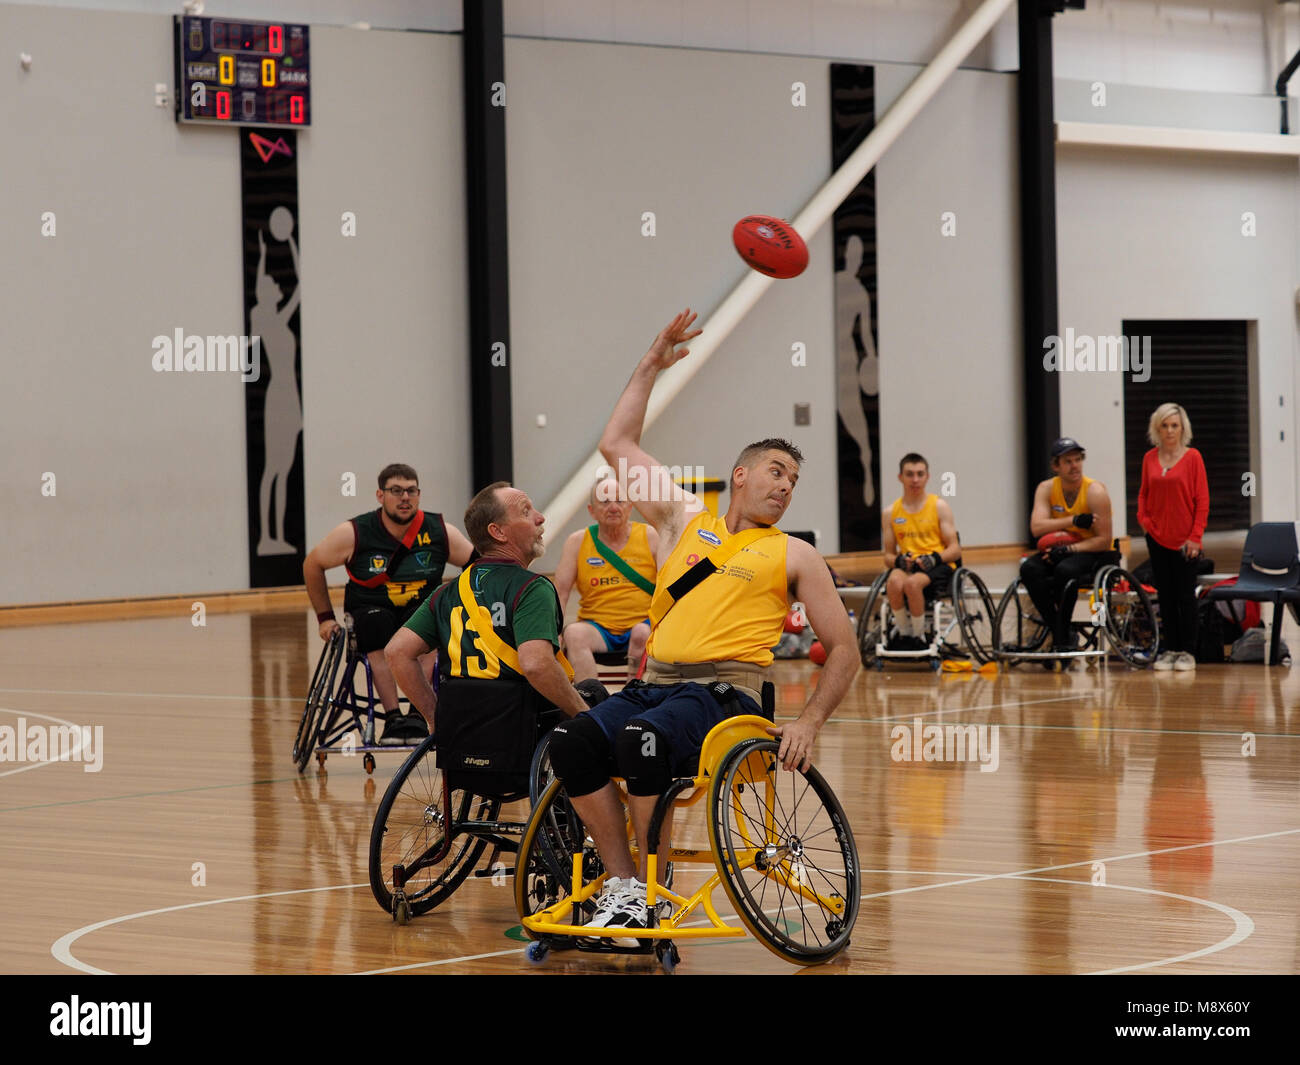 Melbourne, Australia. 21st March, 2018. Melbourne2018 Wheelchair Aussie Rules National Championship, opening pool game South Australia vs Tasmania. Credit Bill Forrester/Alamy Live News Stock Photo